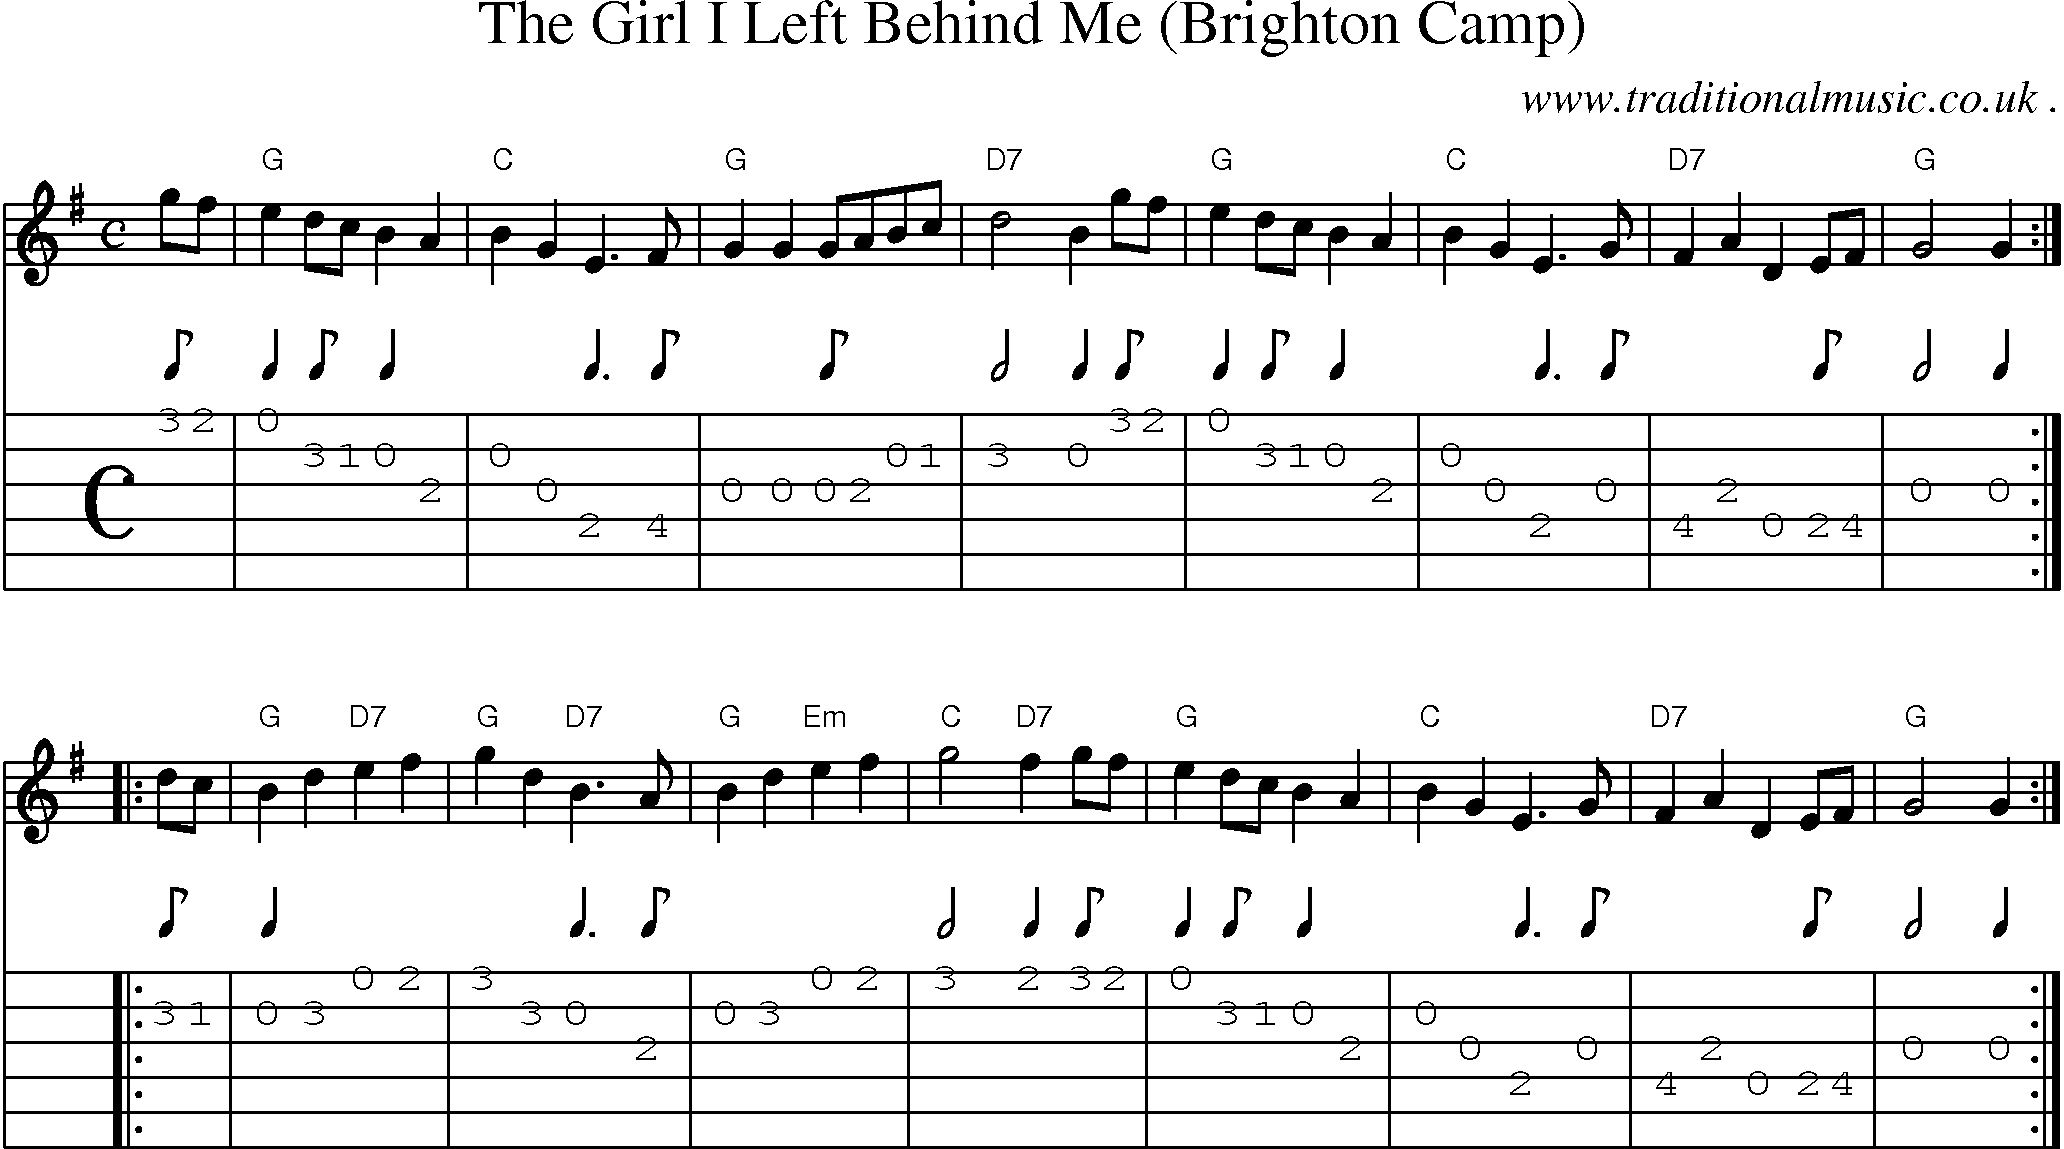 Sheet-music  score, Chords and Guitar Tabs for The Girl I Left Behind Me Brighton Camp